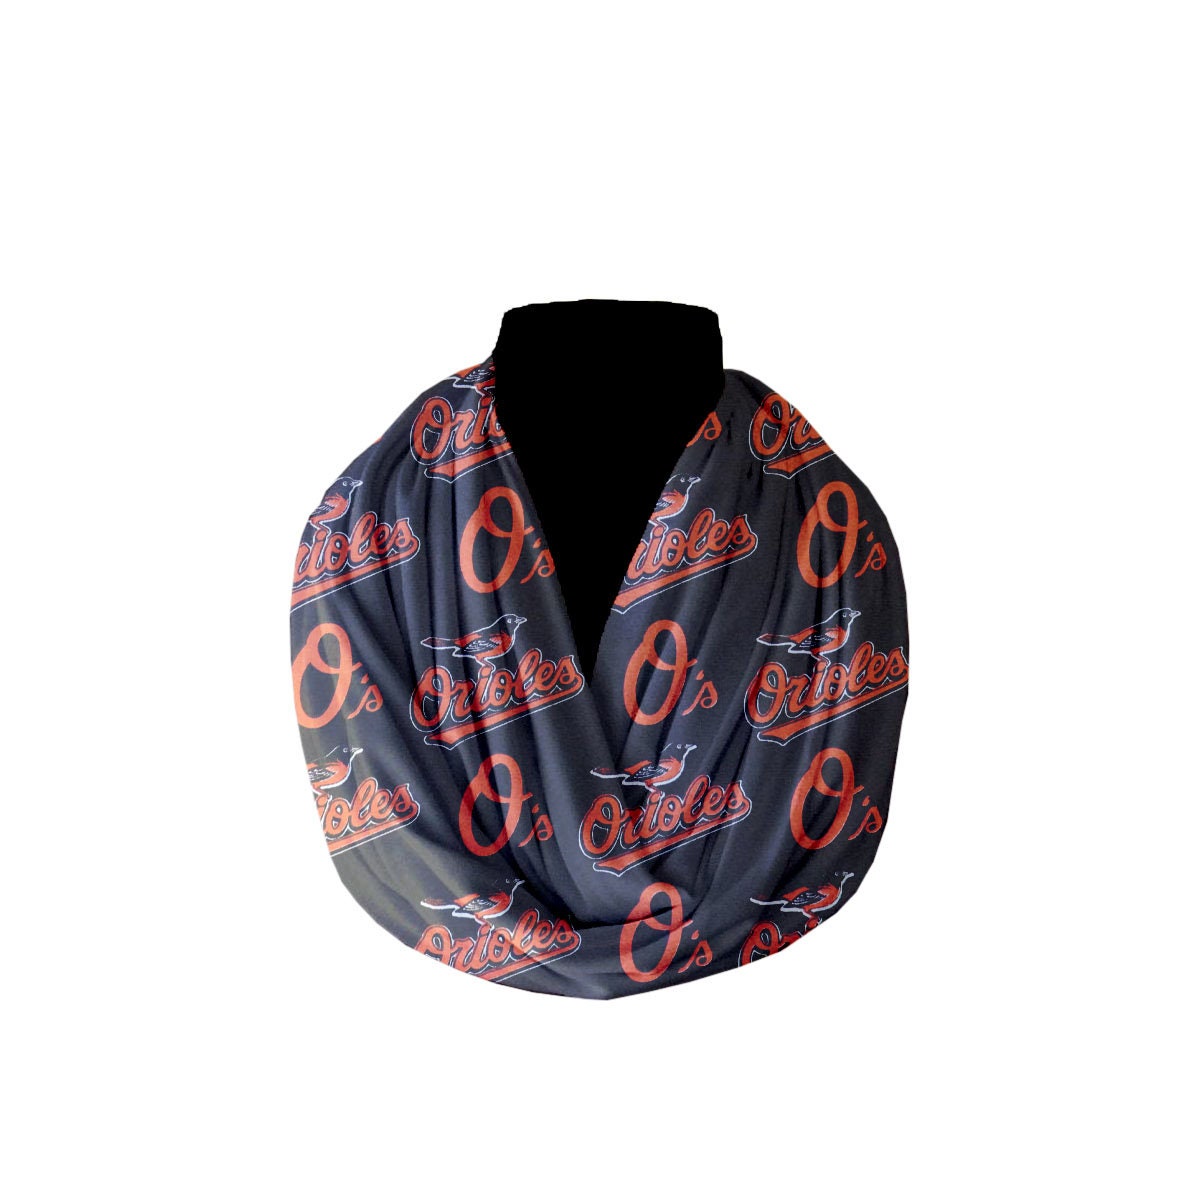 I didn't really love any of the Women's scarves so I bought a Men's scarf!  : r/Louisvuitton